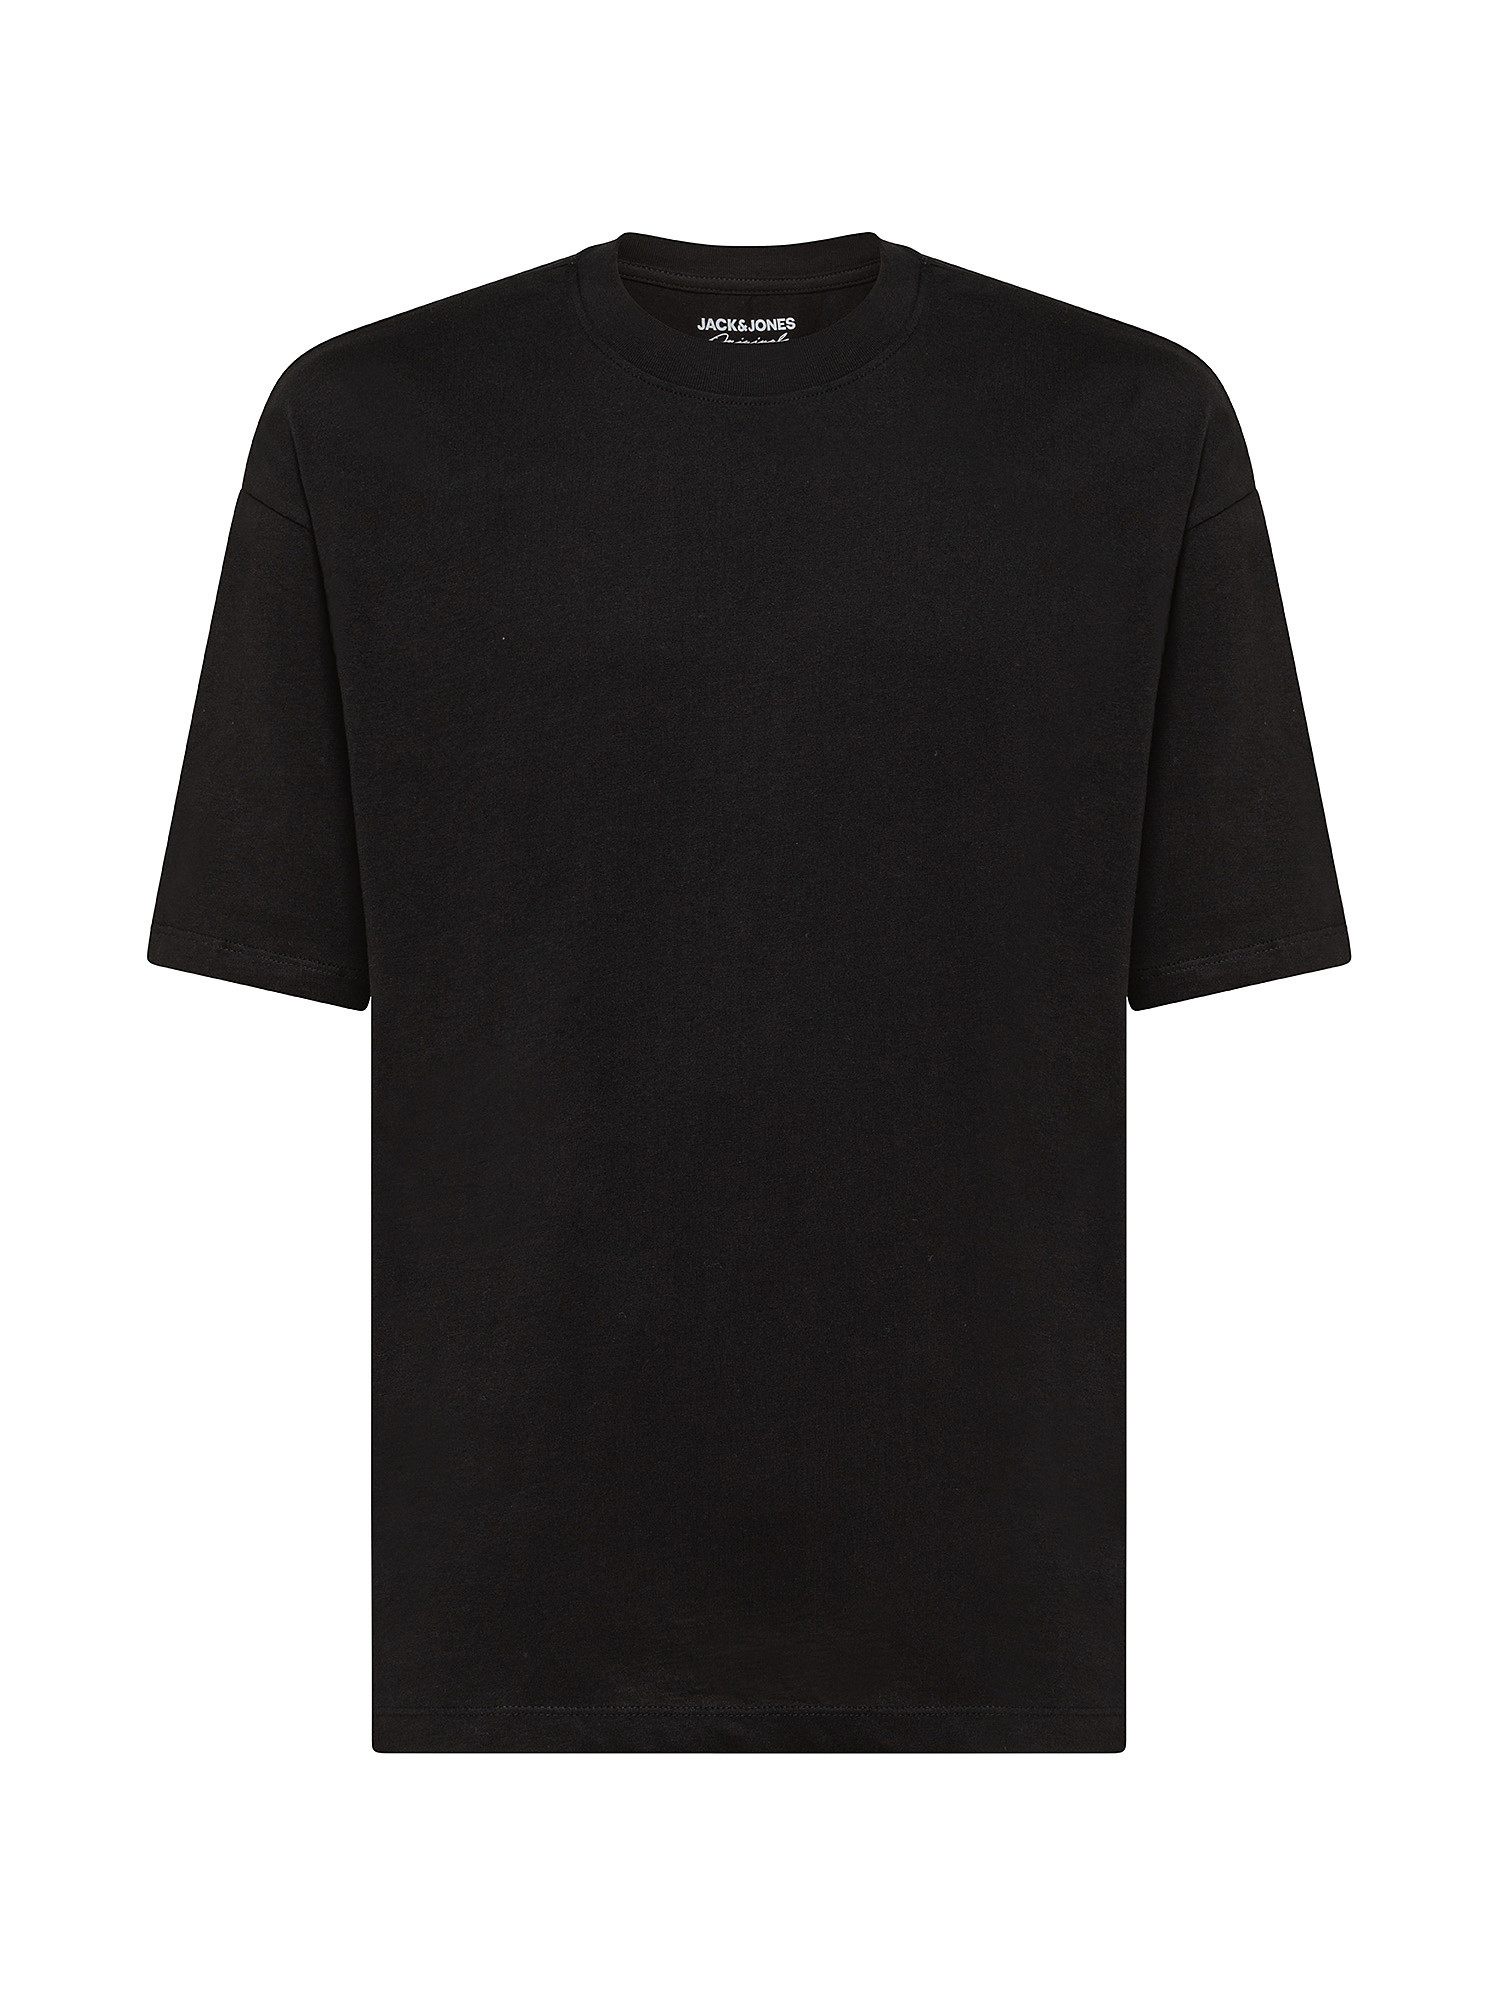 T-shirt in 100% cotton, Black, large image number 0